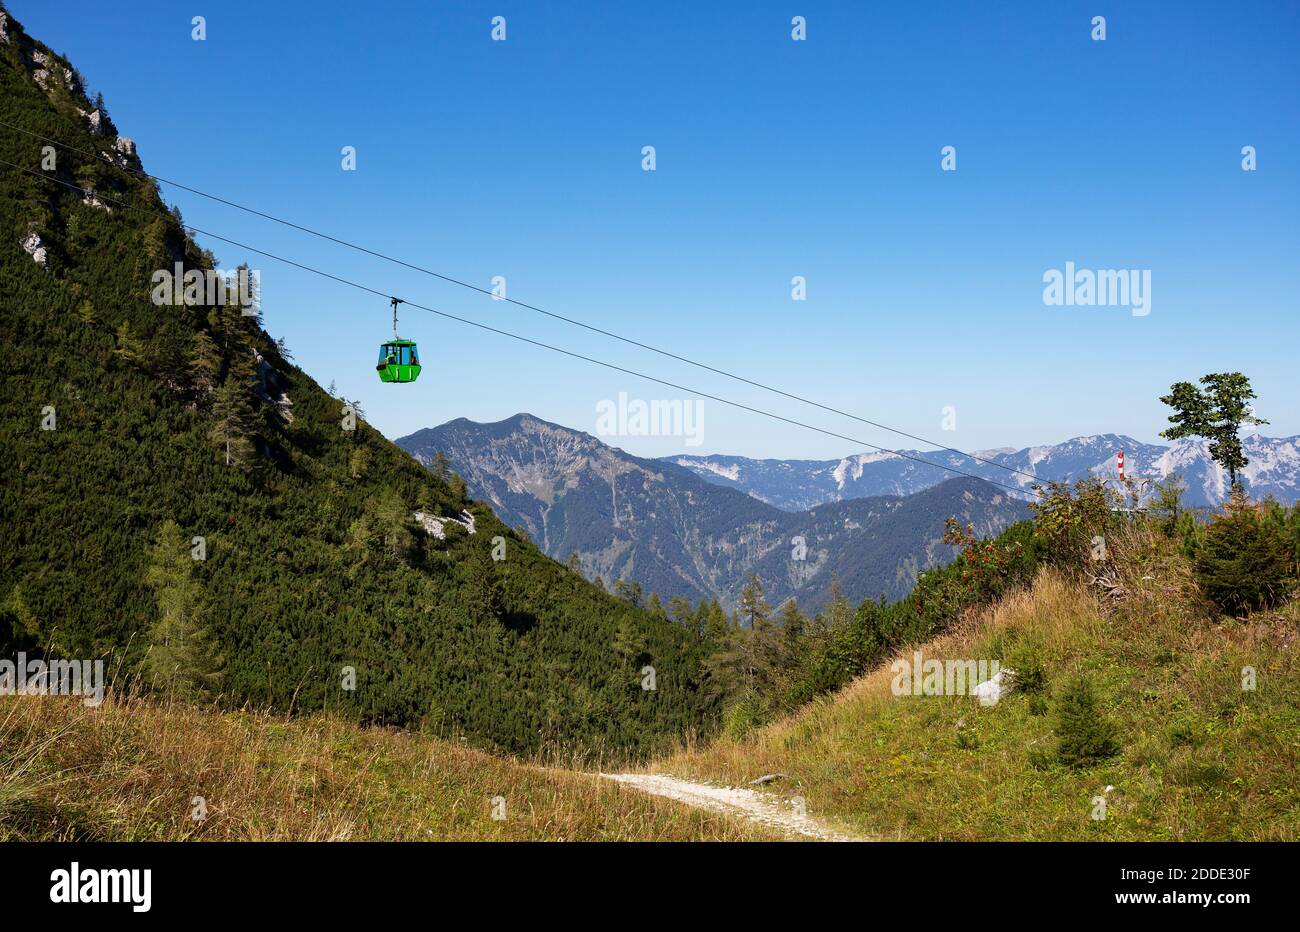 Austria, Upper Austria, Bad Ischl, Overhead cable car moving over forested mountain valley Stock Photo